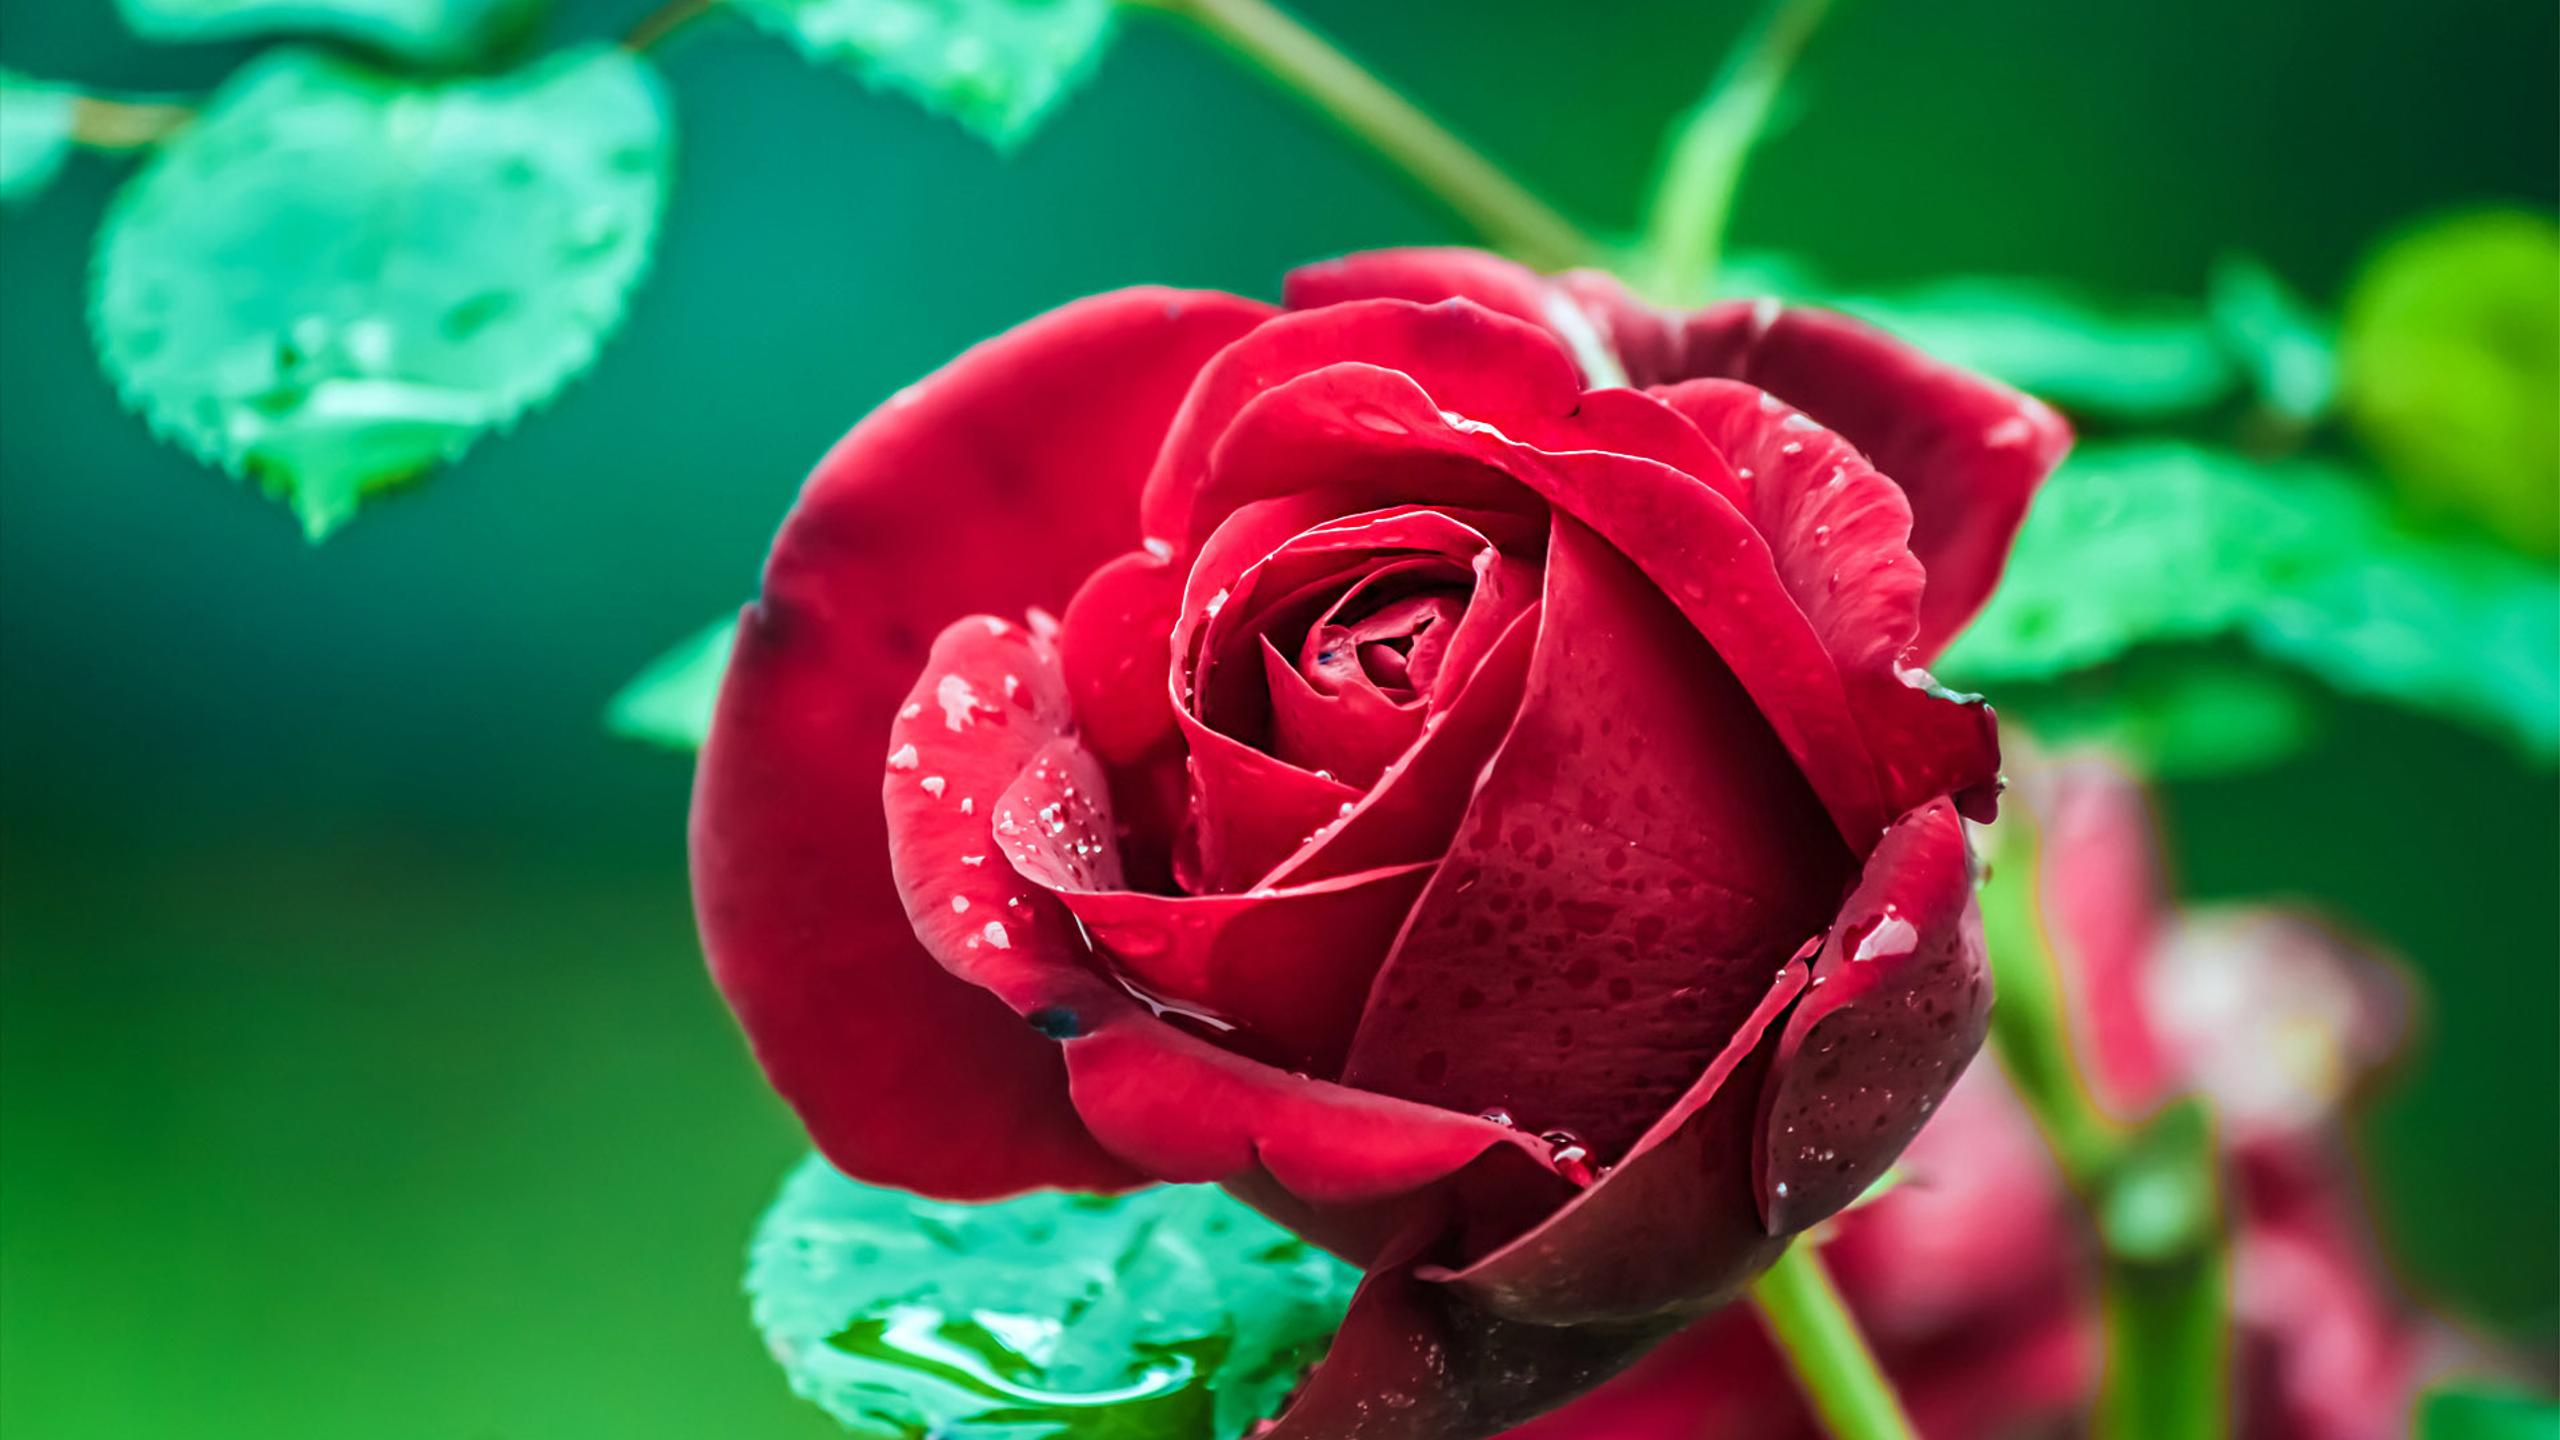 Beautiful red rose with raindrops in the garden